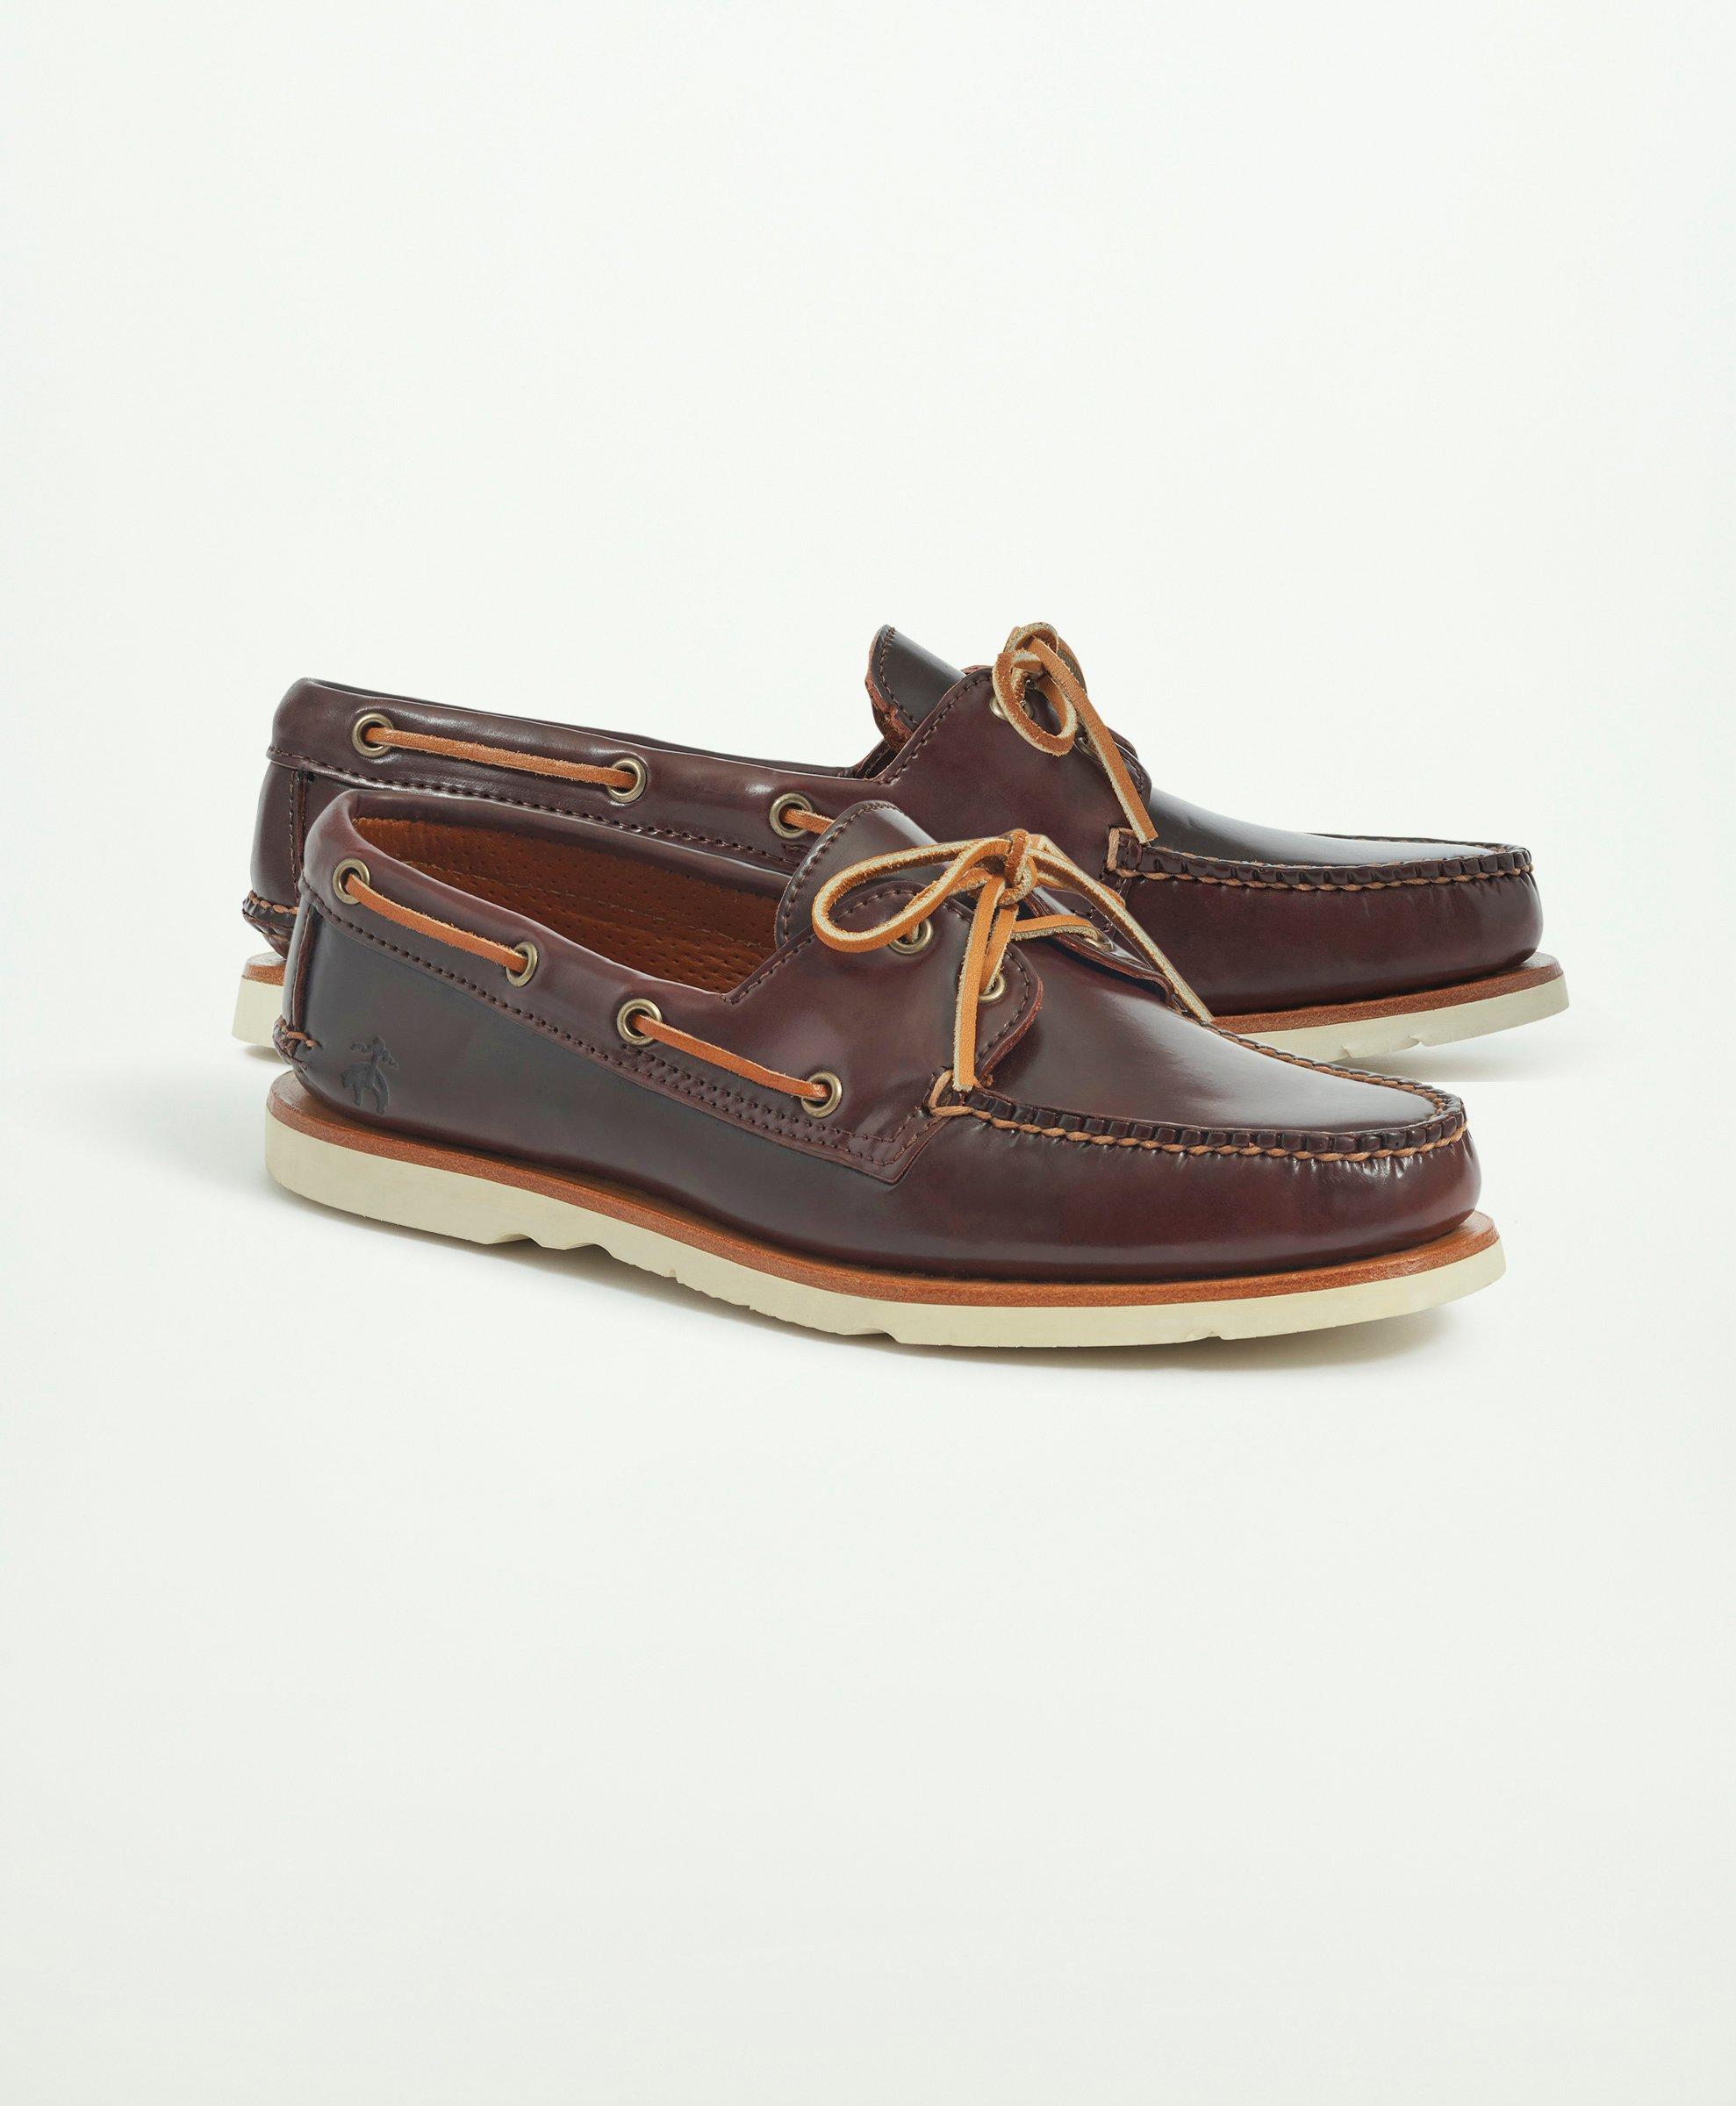 Sperry and Brooks Brothers Team Up for a $1,000 Cordovan Boat Shoe